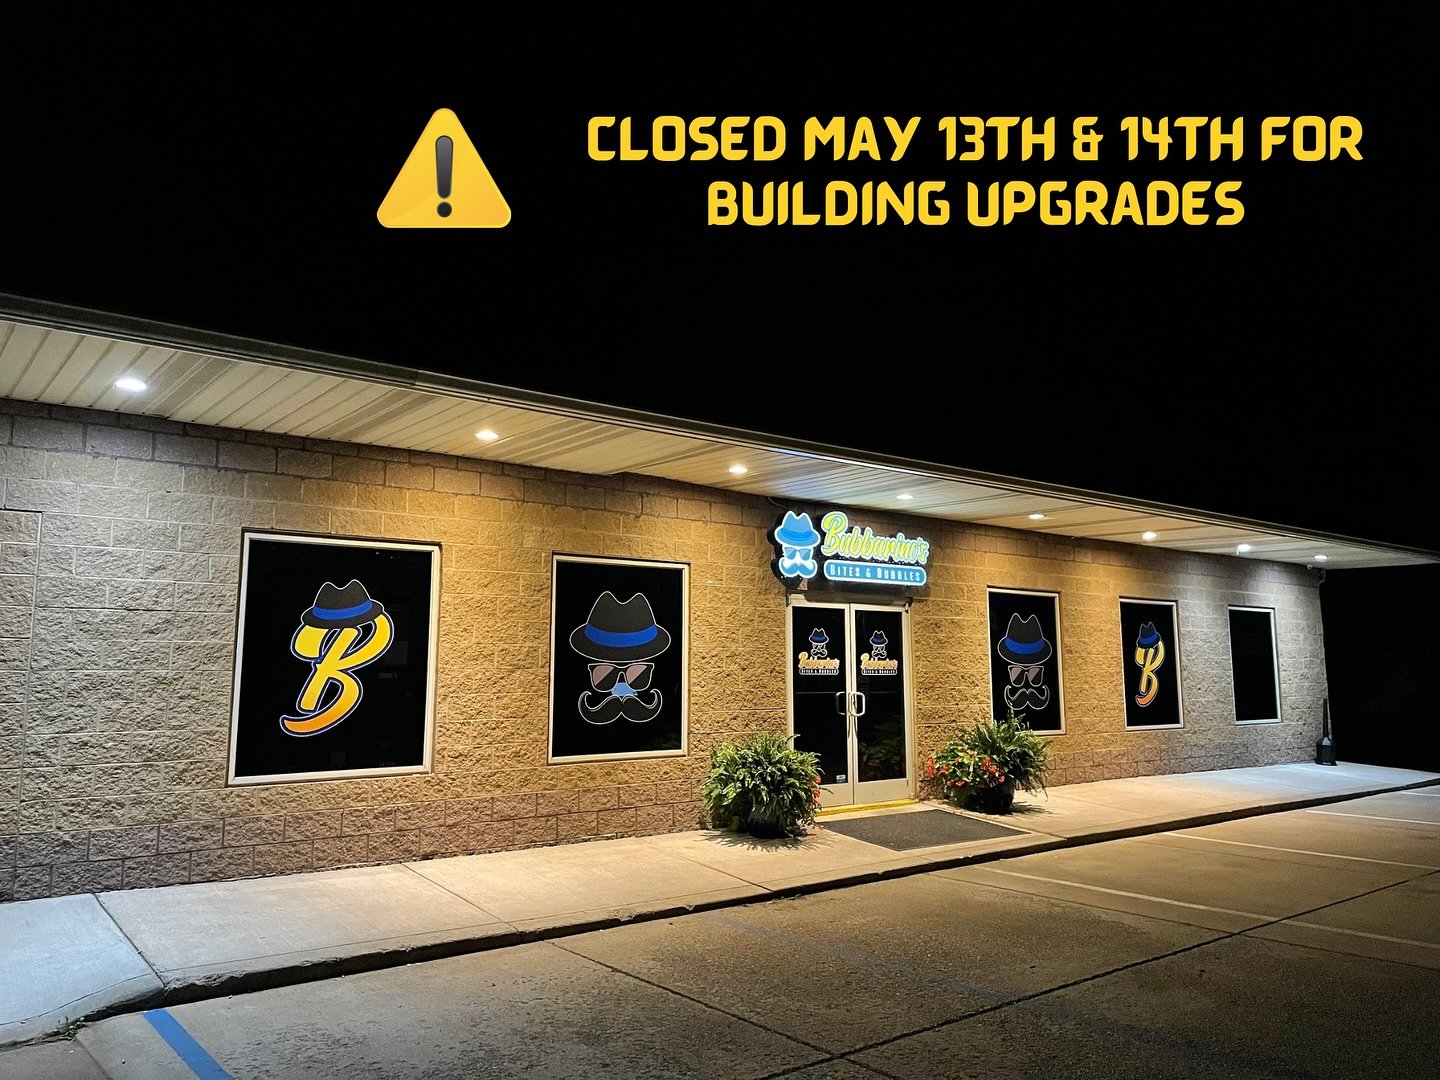 ⚠️ We will be closed next Monday &amp; Tuesday for HVAC upgrades and parking lot/sidewalk reconstruction.

These have been two very big problems for us since we opened a couple years back; we are fortunate enough to tackle this issues so we can creat